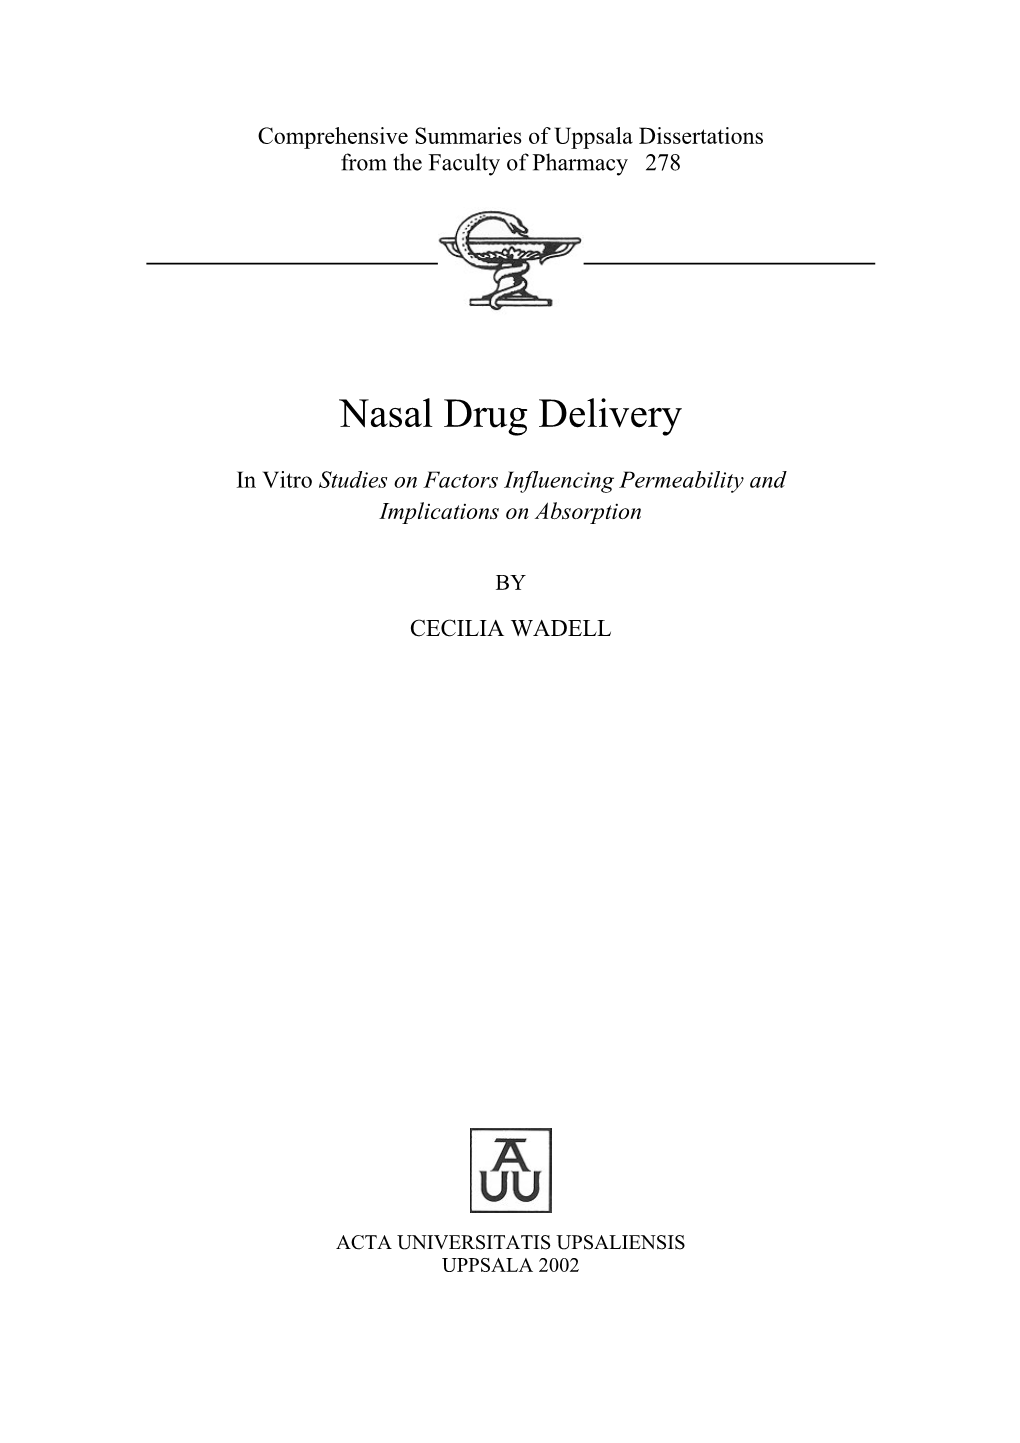 Nasal Drug Delivery – in Vitro Studies on Factors Influencing Permeability and Implications on Absorption